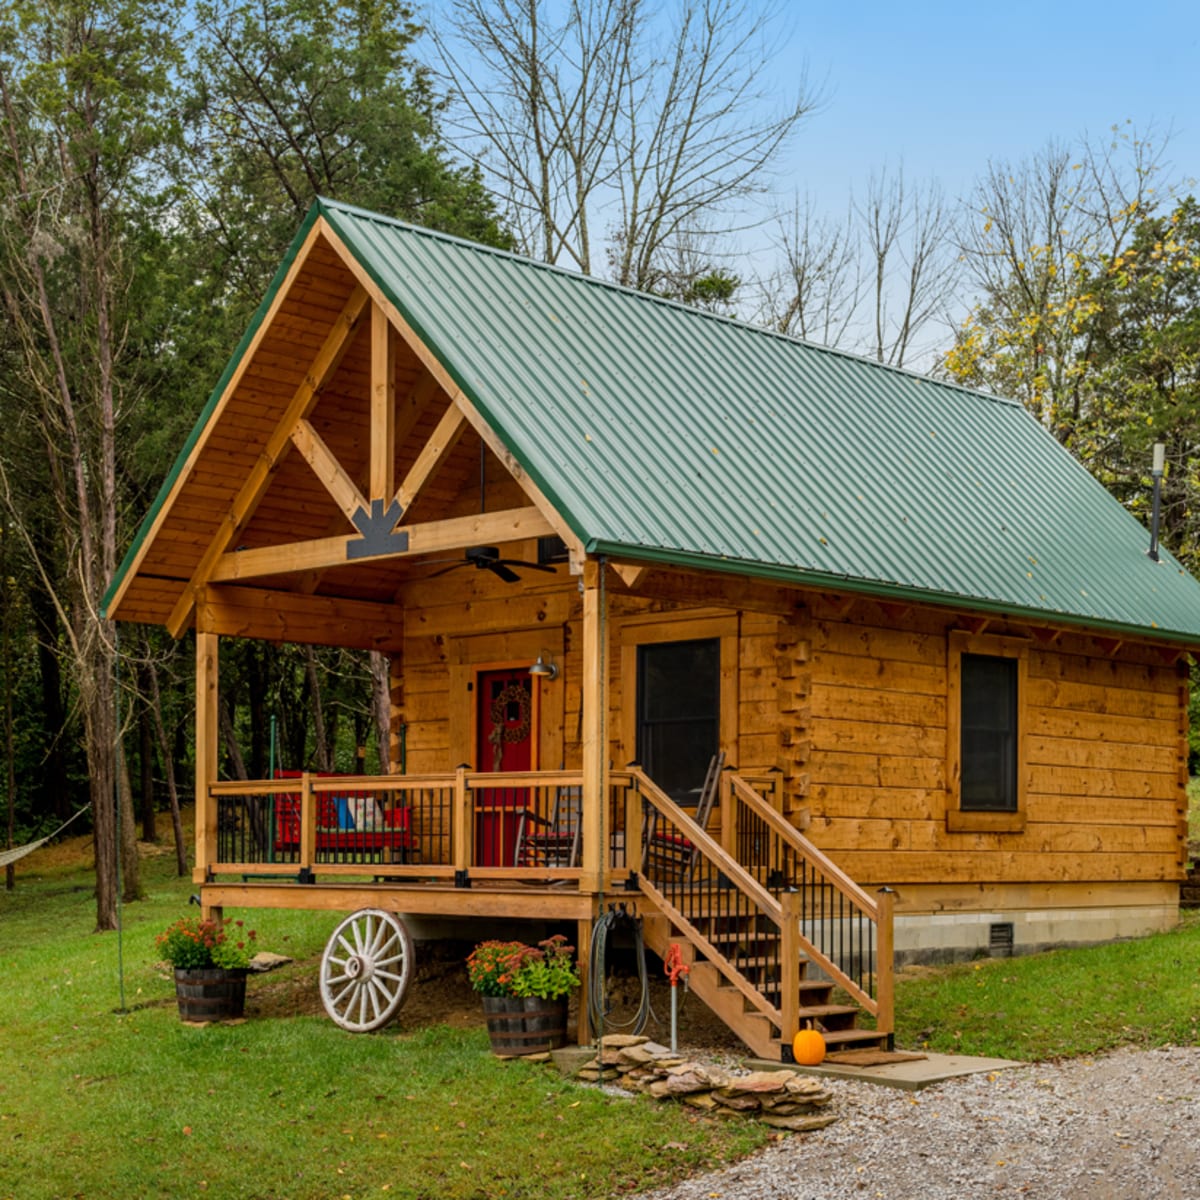 5 Different Ways Of Protecting Your Log Cabin From The Elements - We Fix Log  Homes